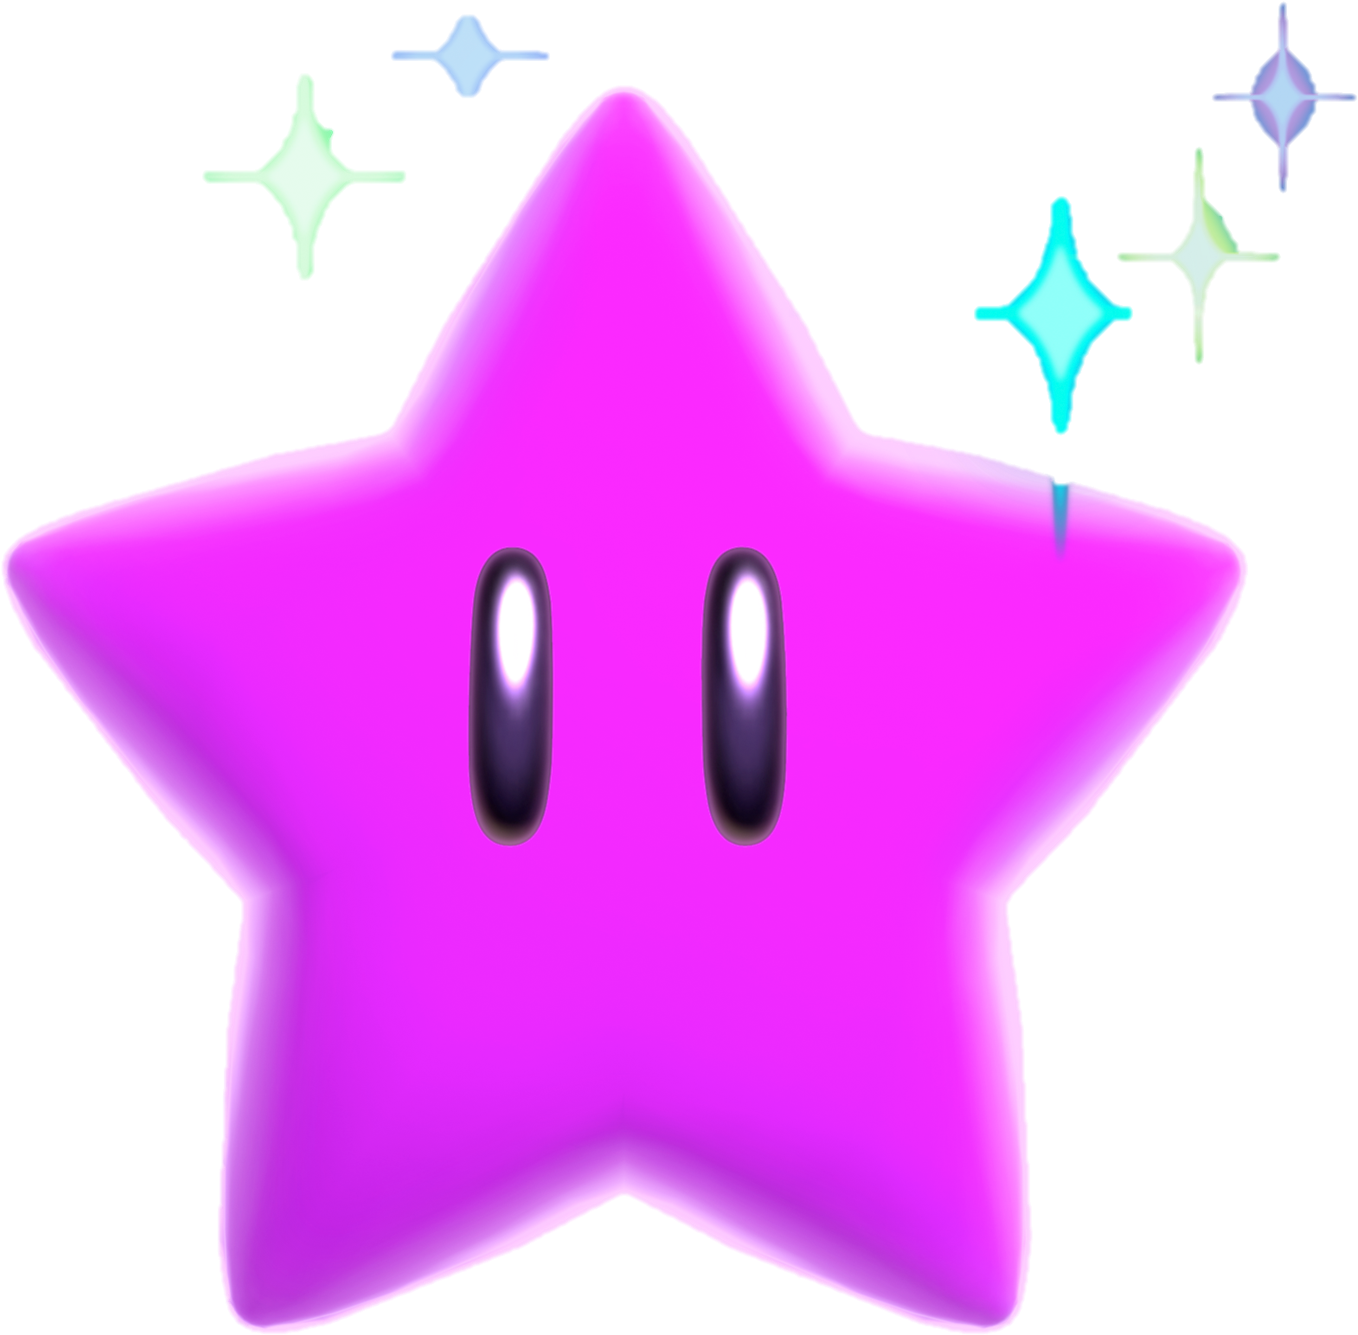 A Pink Star With Two Eyes